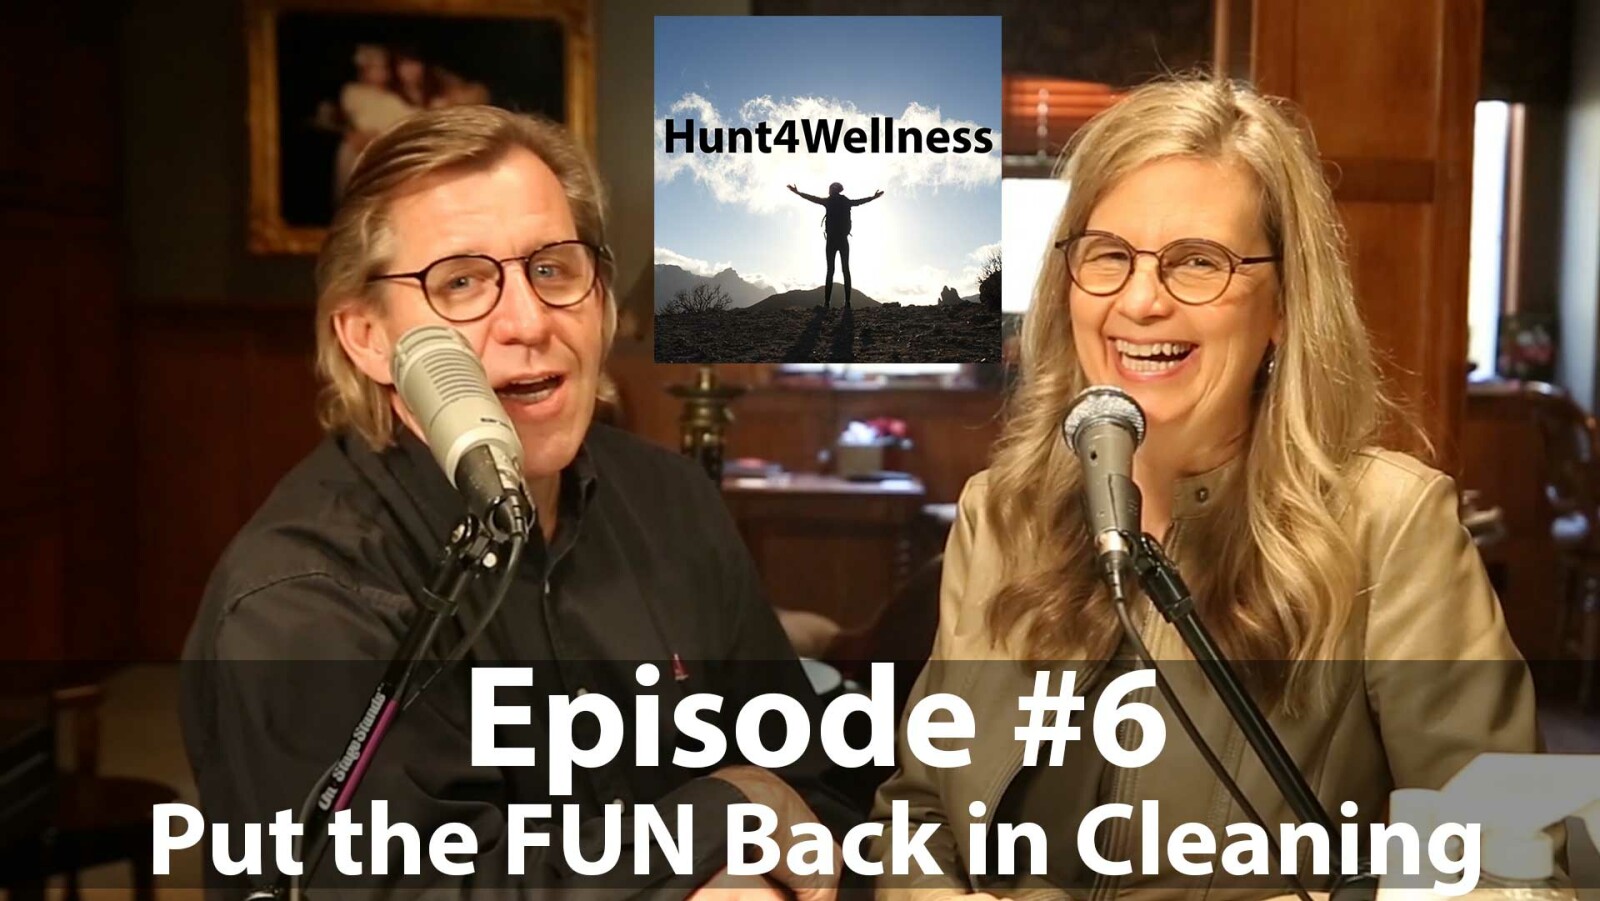 Episode #6 - Put the Fun Back in Cleaning